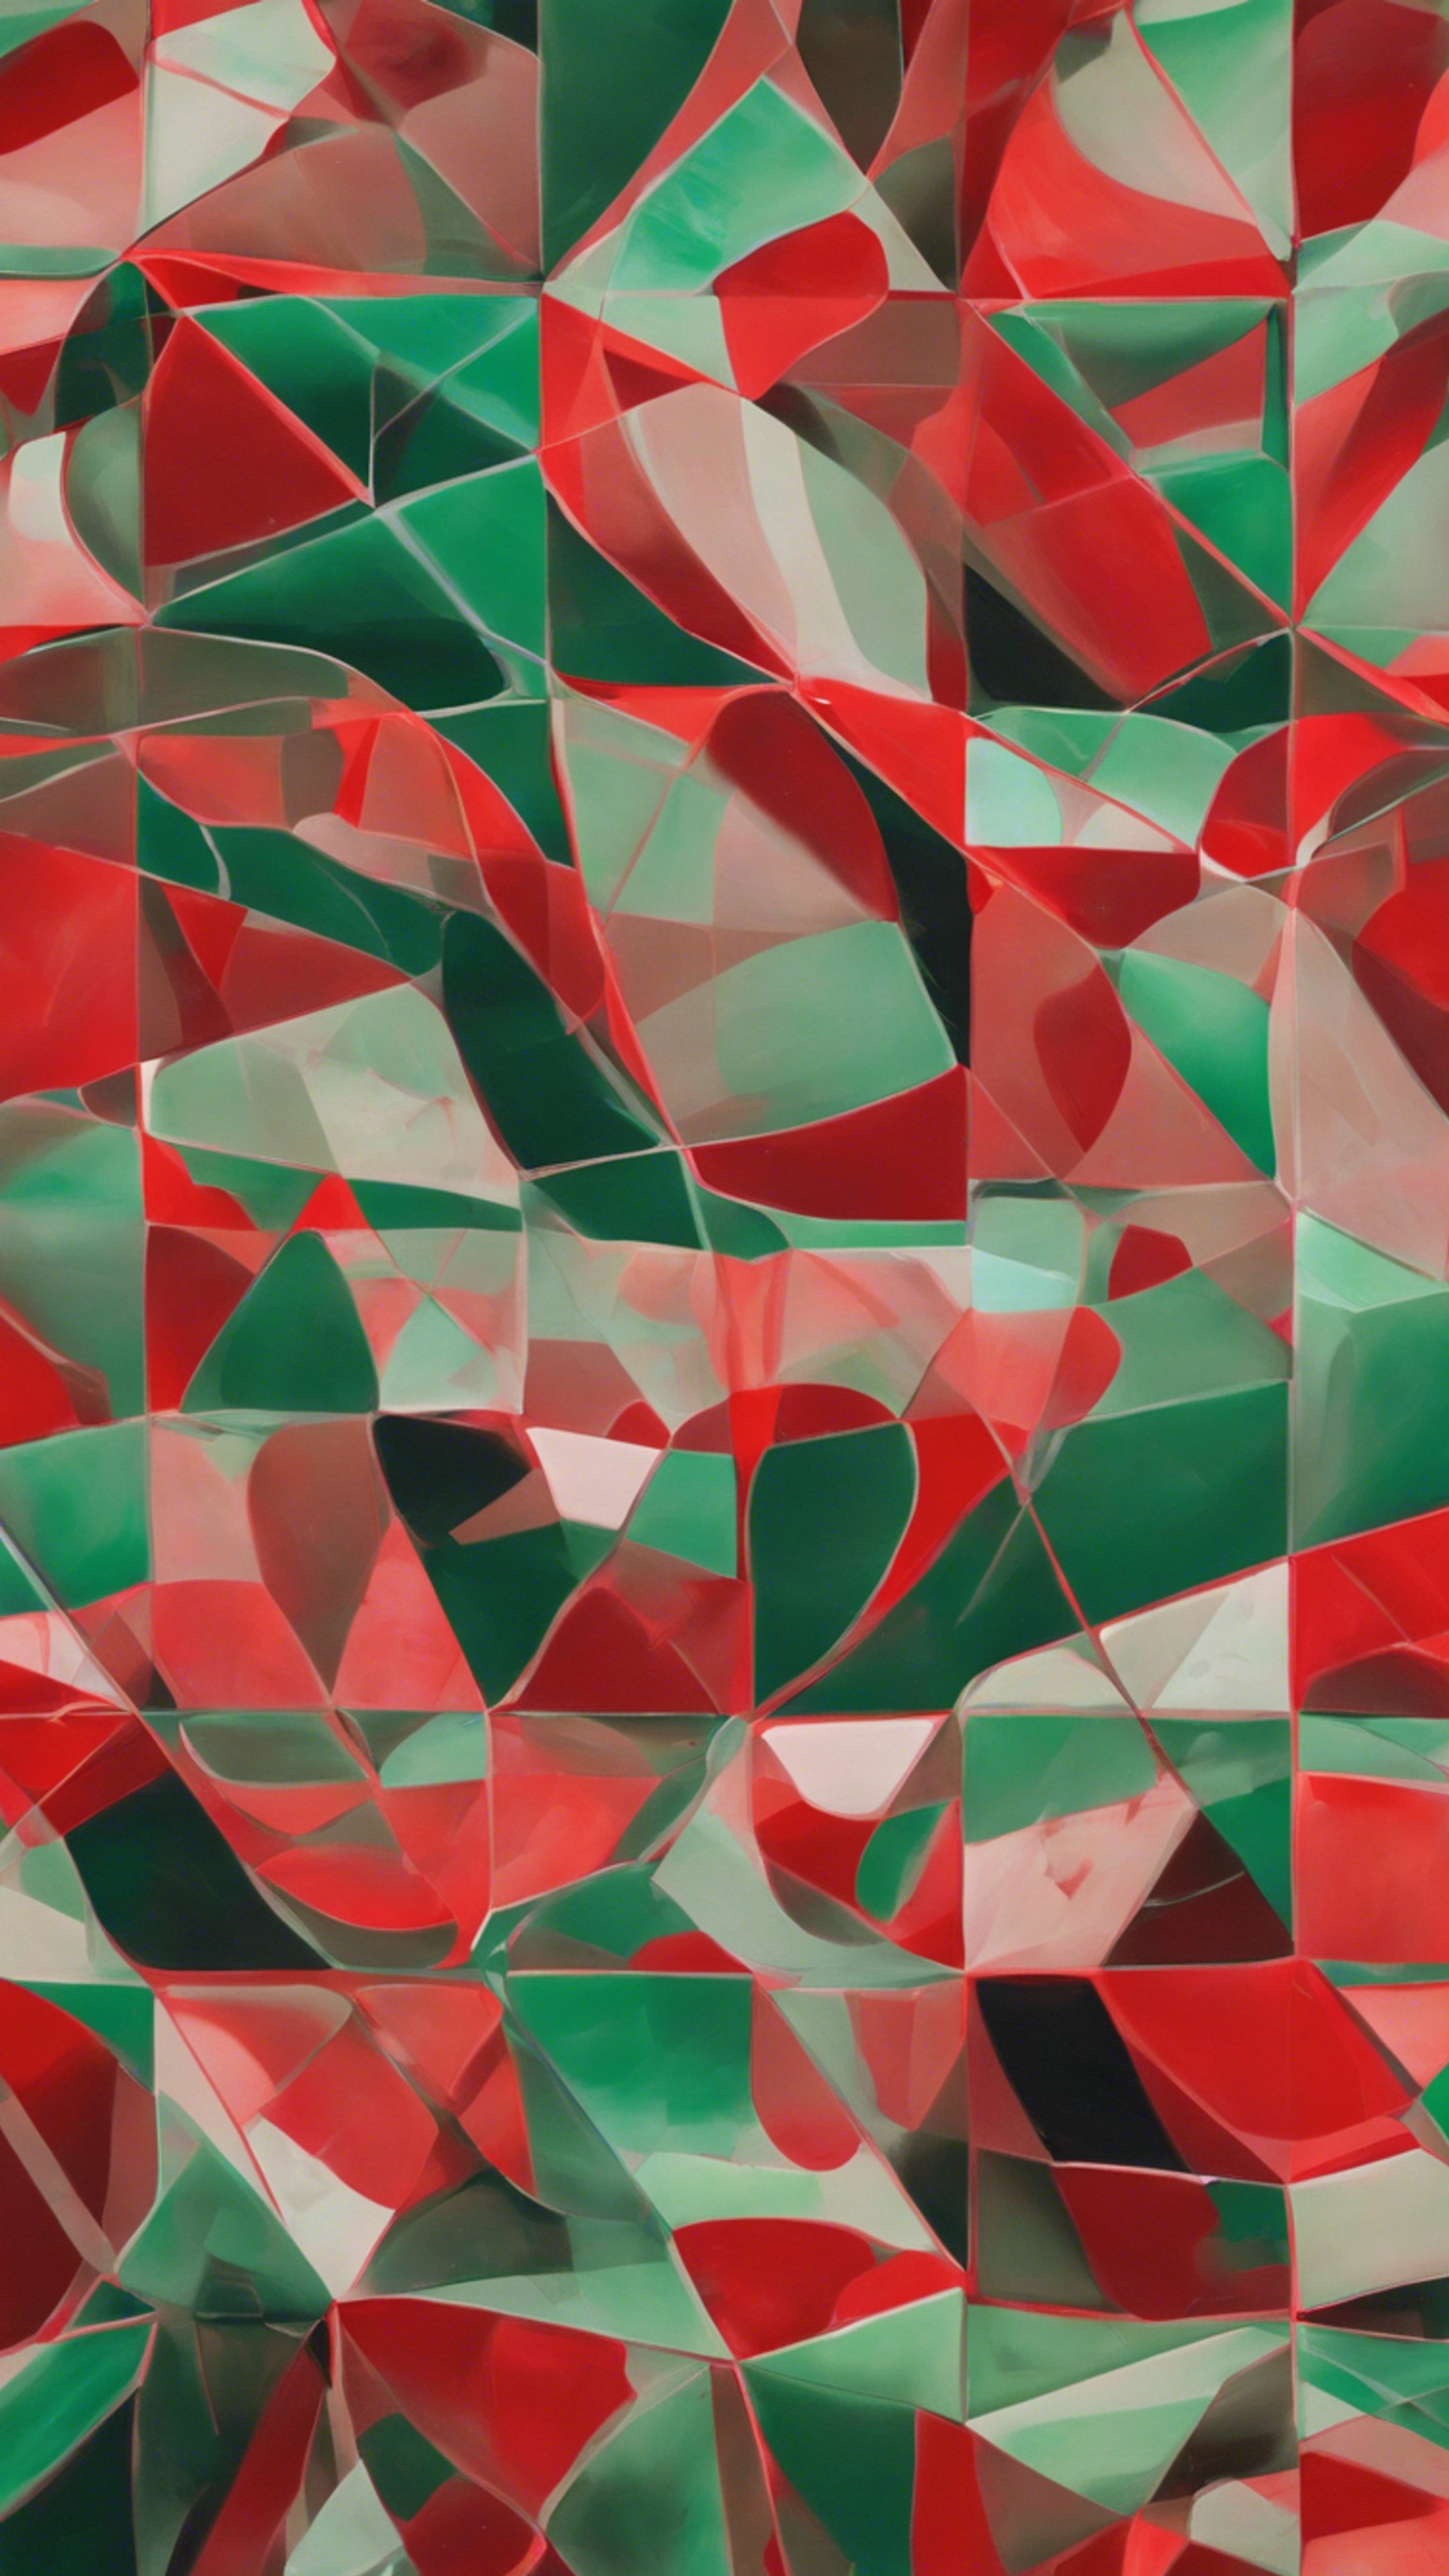 A modernist painting of red and green geometrical shapes, seamless in their connection Divar kağızı[cfa3acf637214e6a9239]